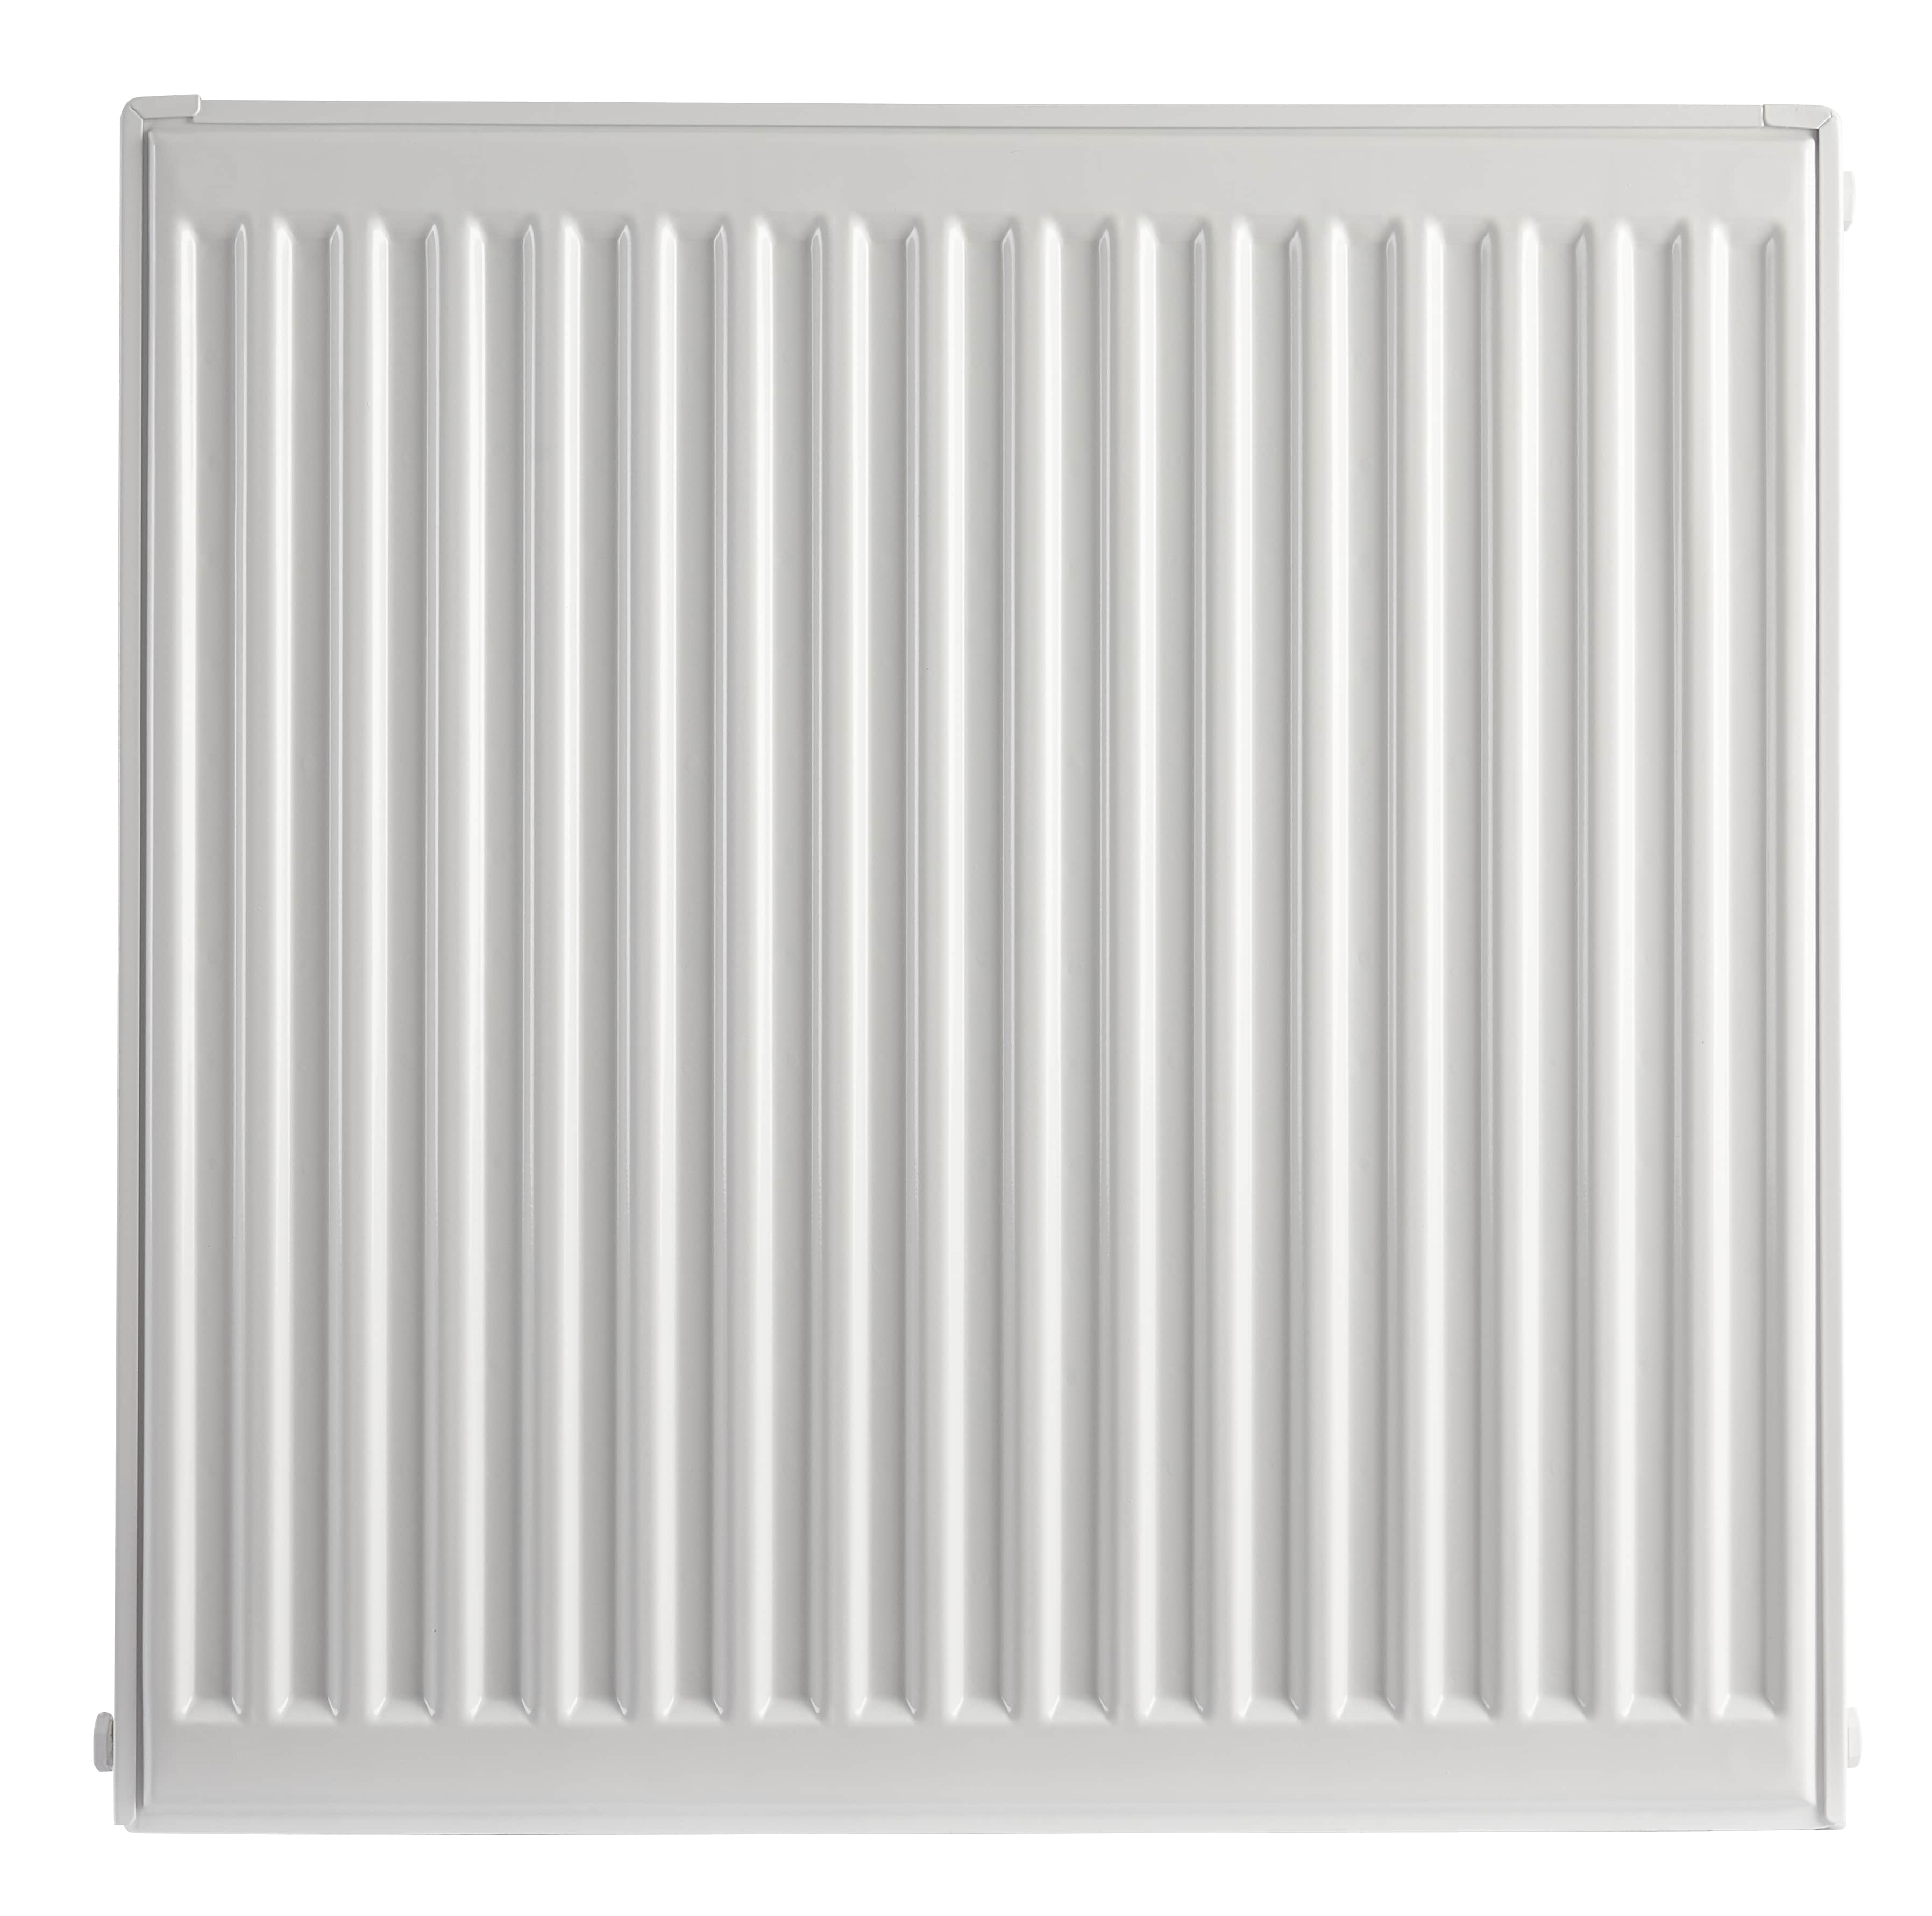 Homeline by Stelrad Type 21 Double Panel Plus Single Convector Radiator - 700 x 500mm